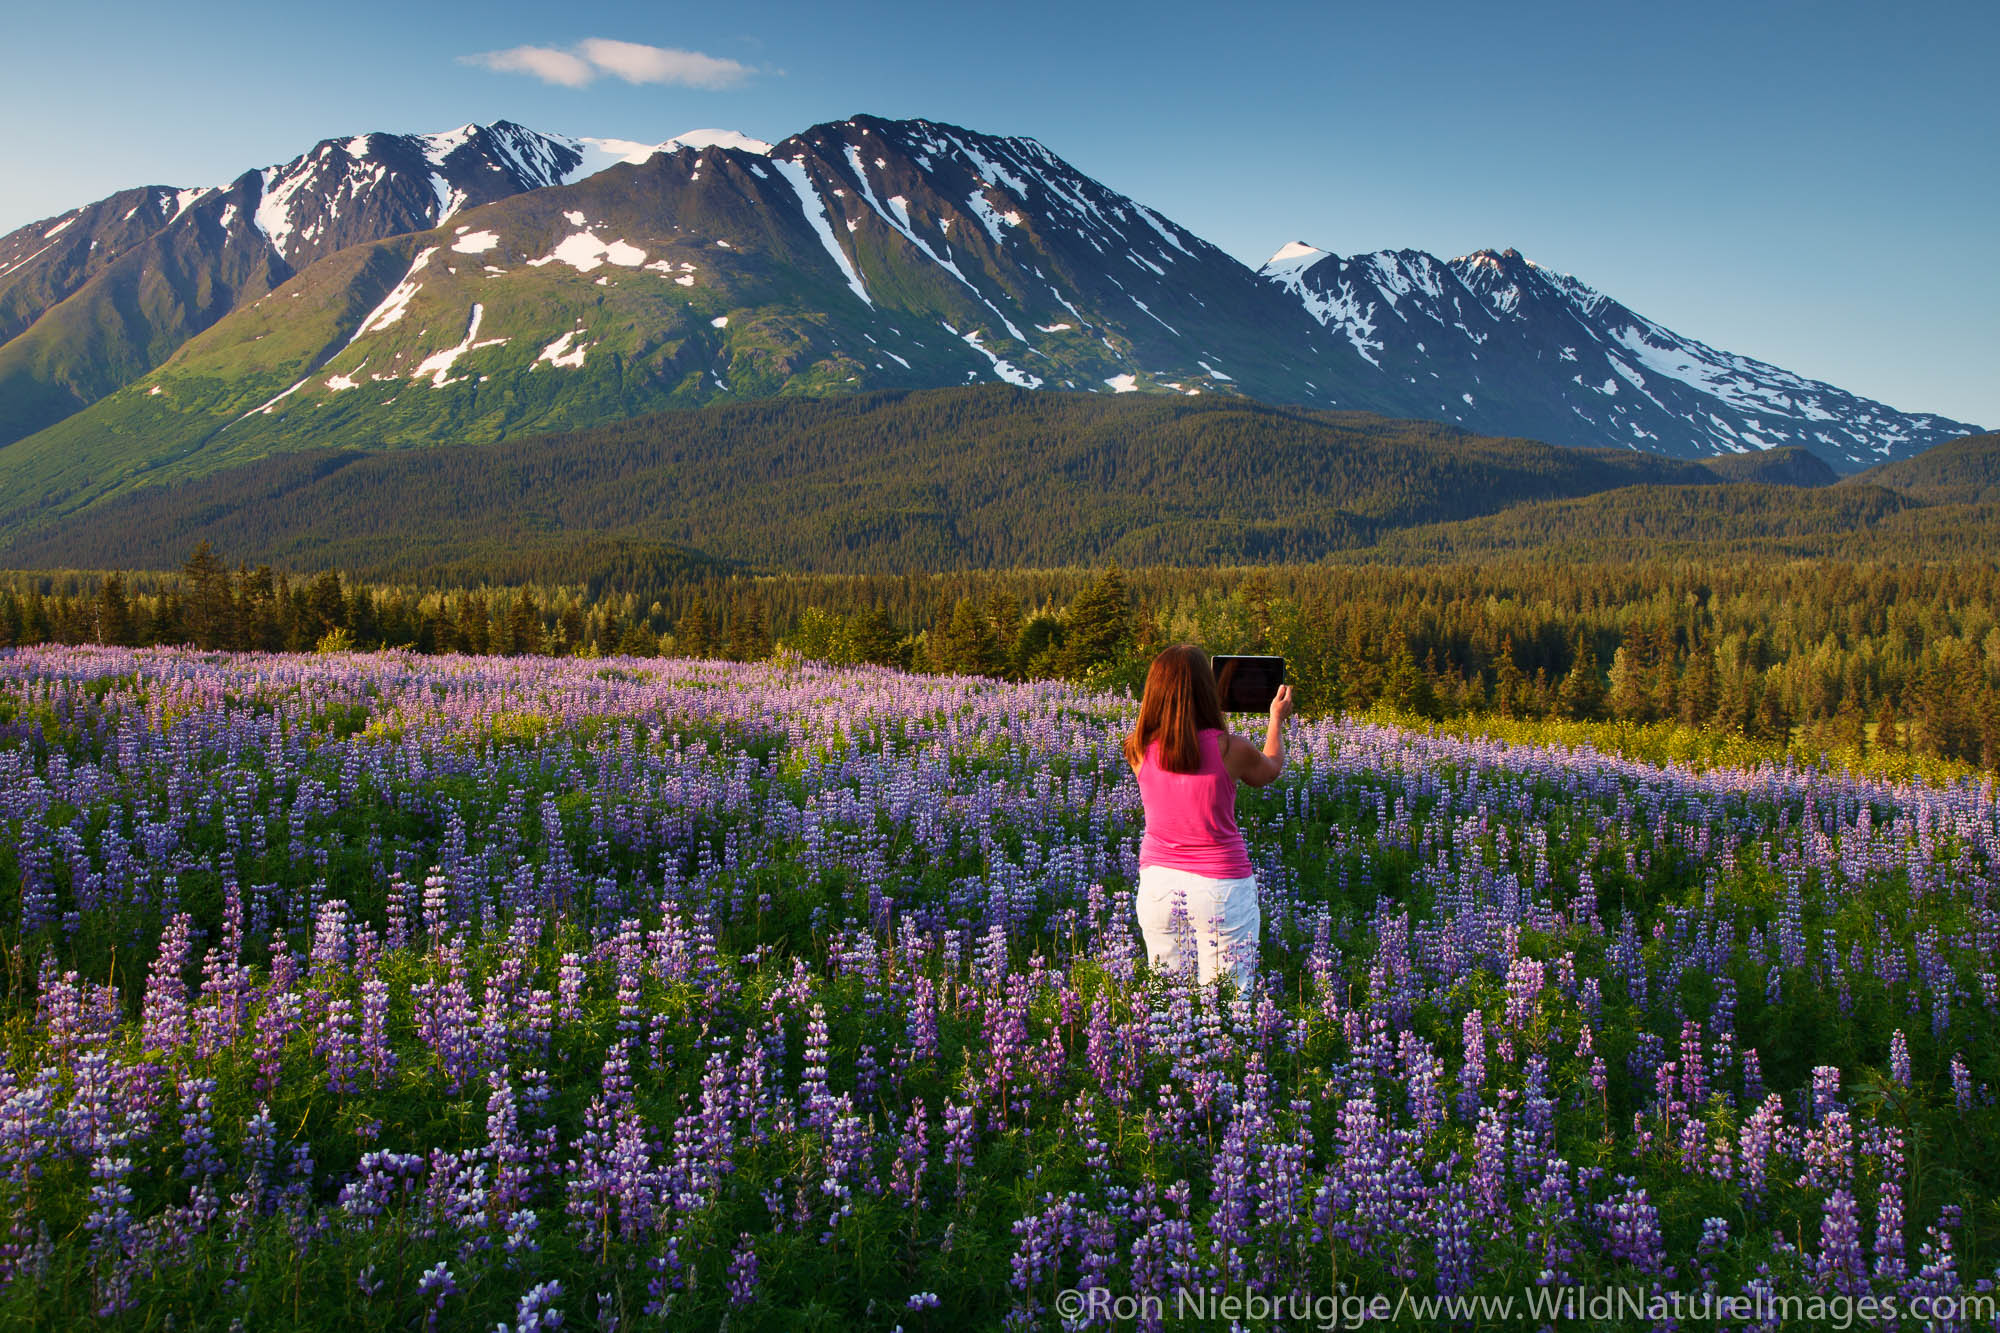 Visitor taking a photo with an ipad, Chugach National Forest, Alaska.  (model released)